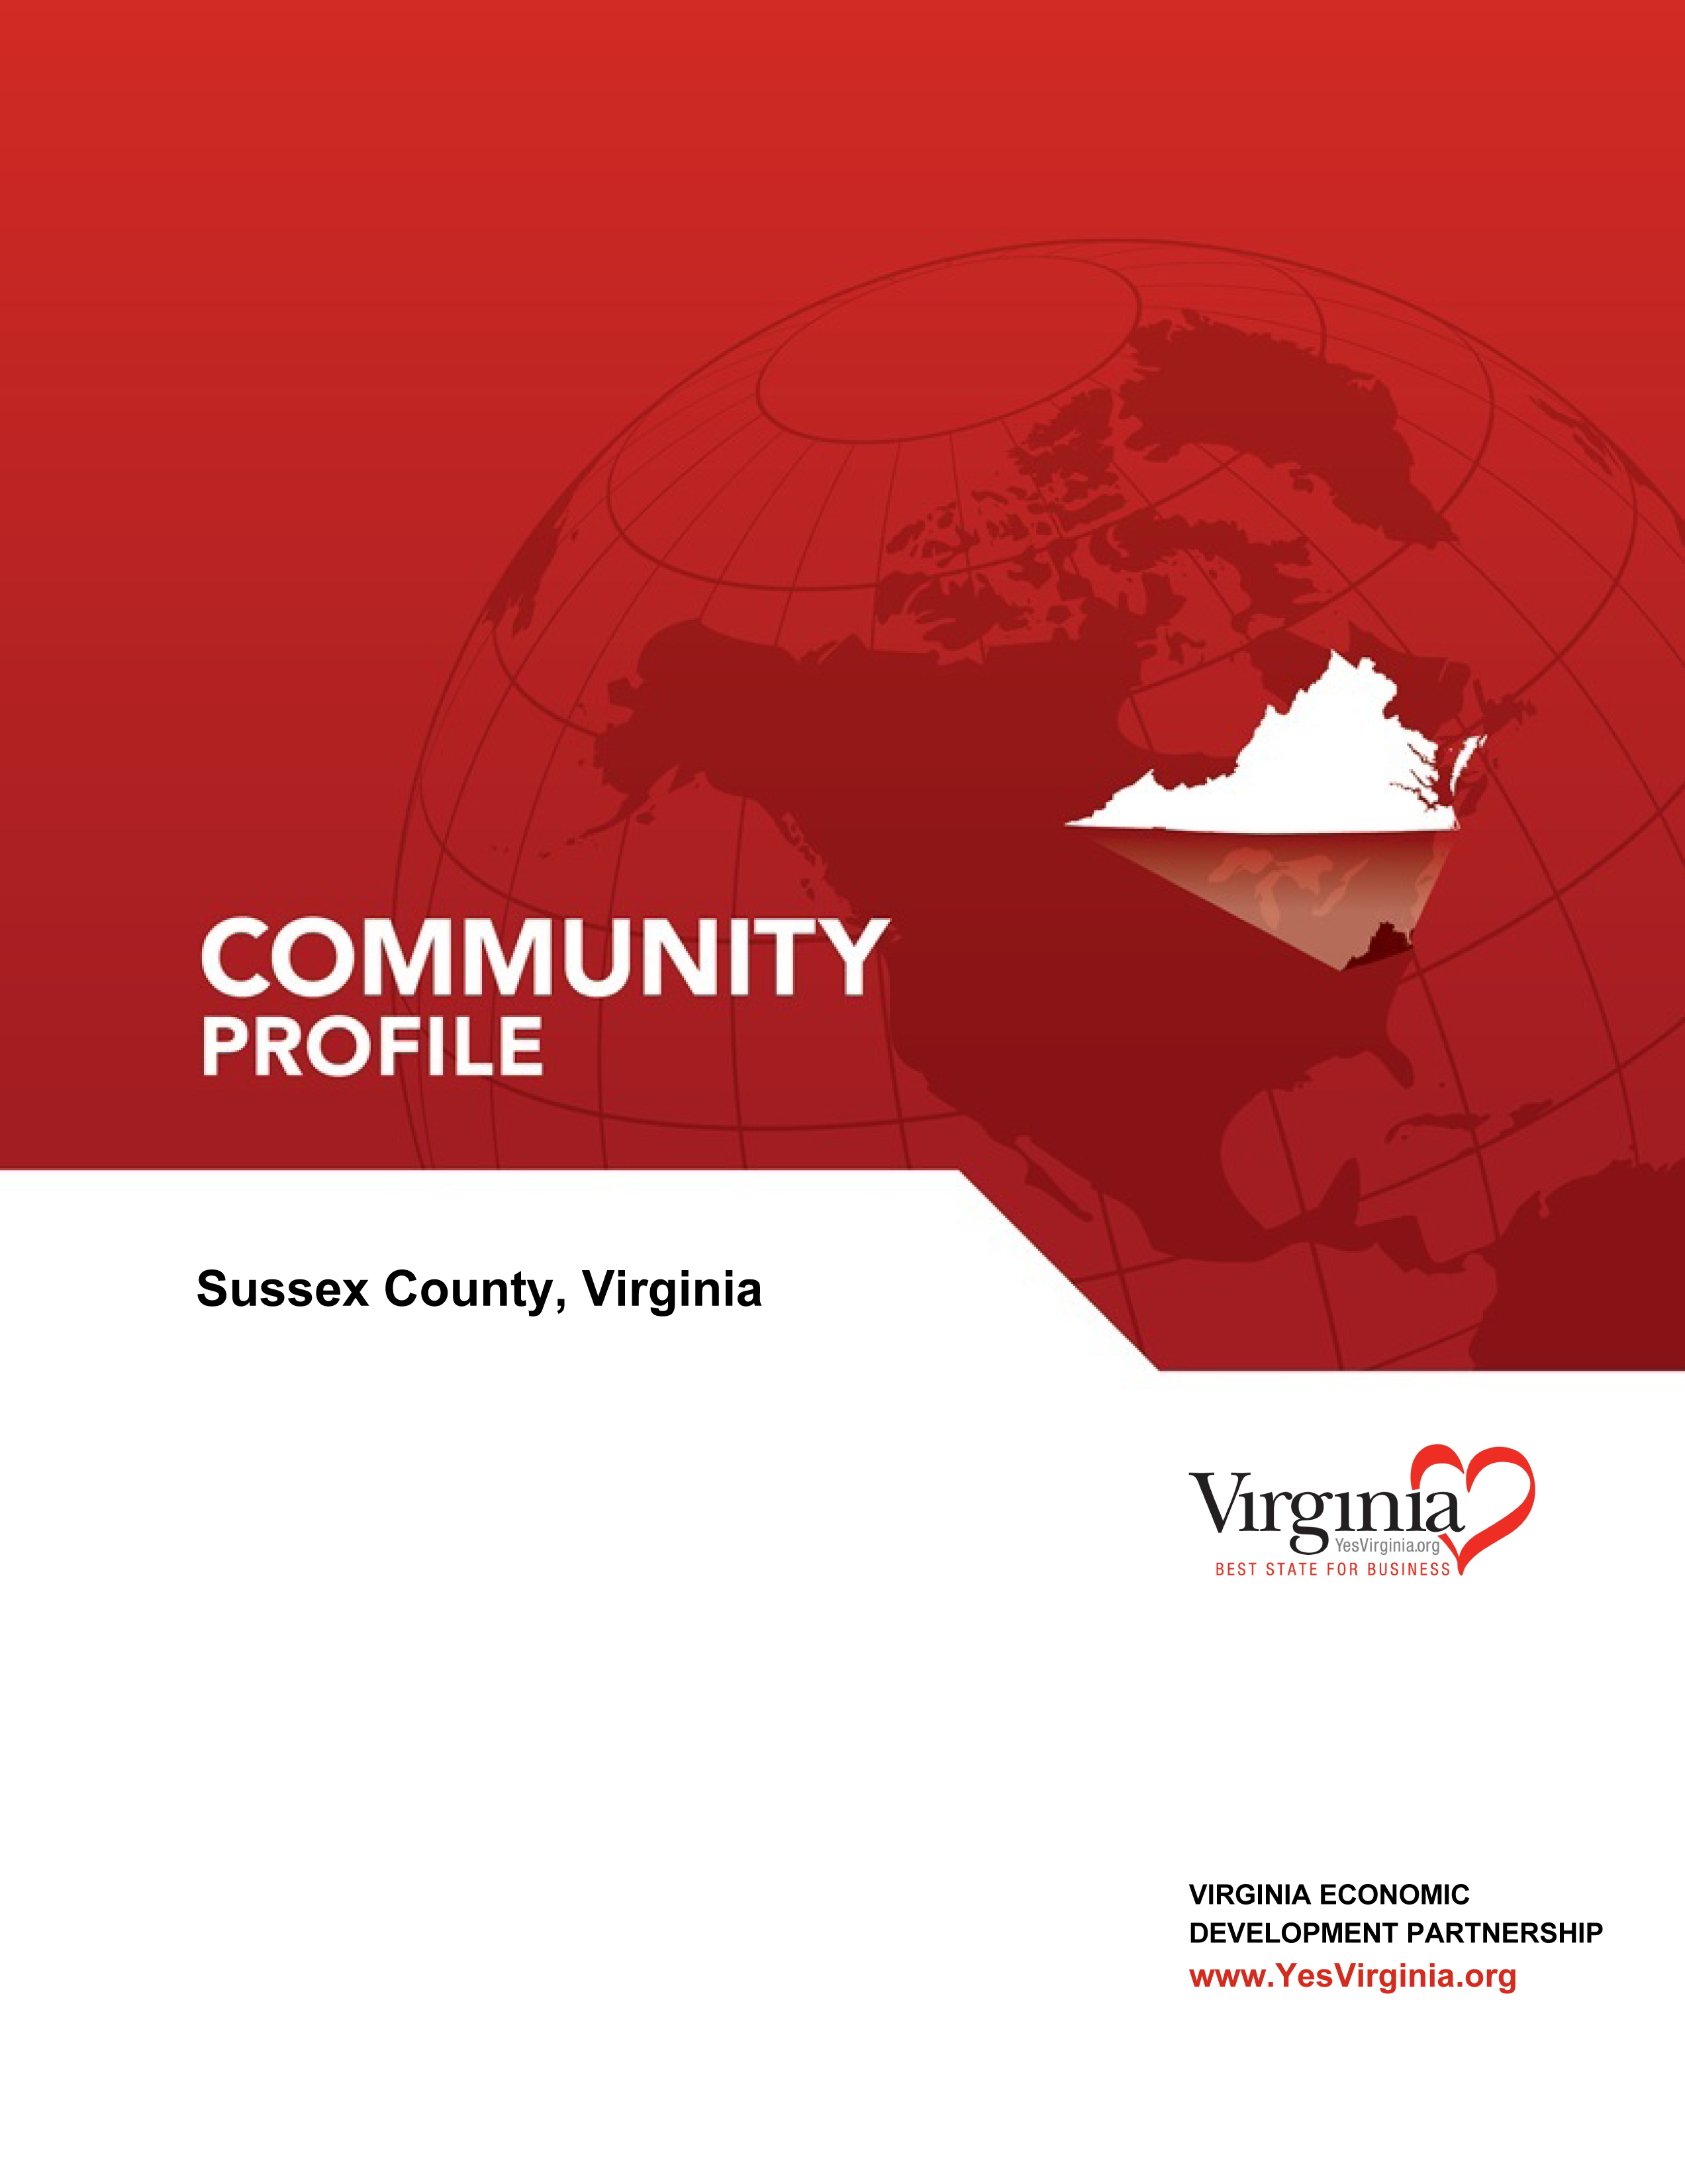 Community Profile for Sussex County, Virginia